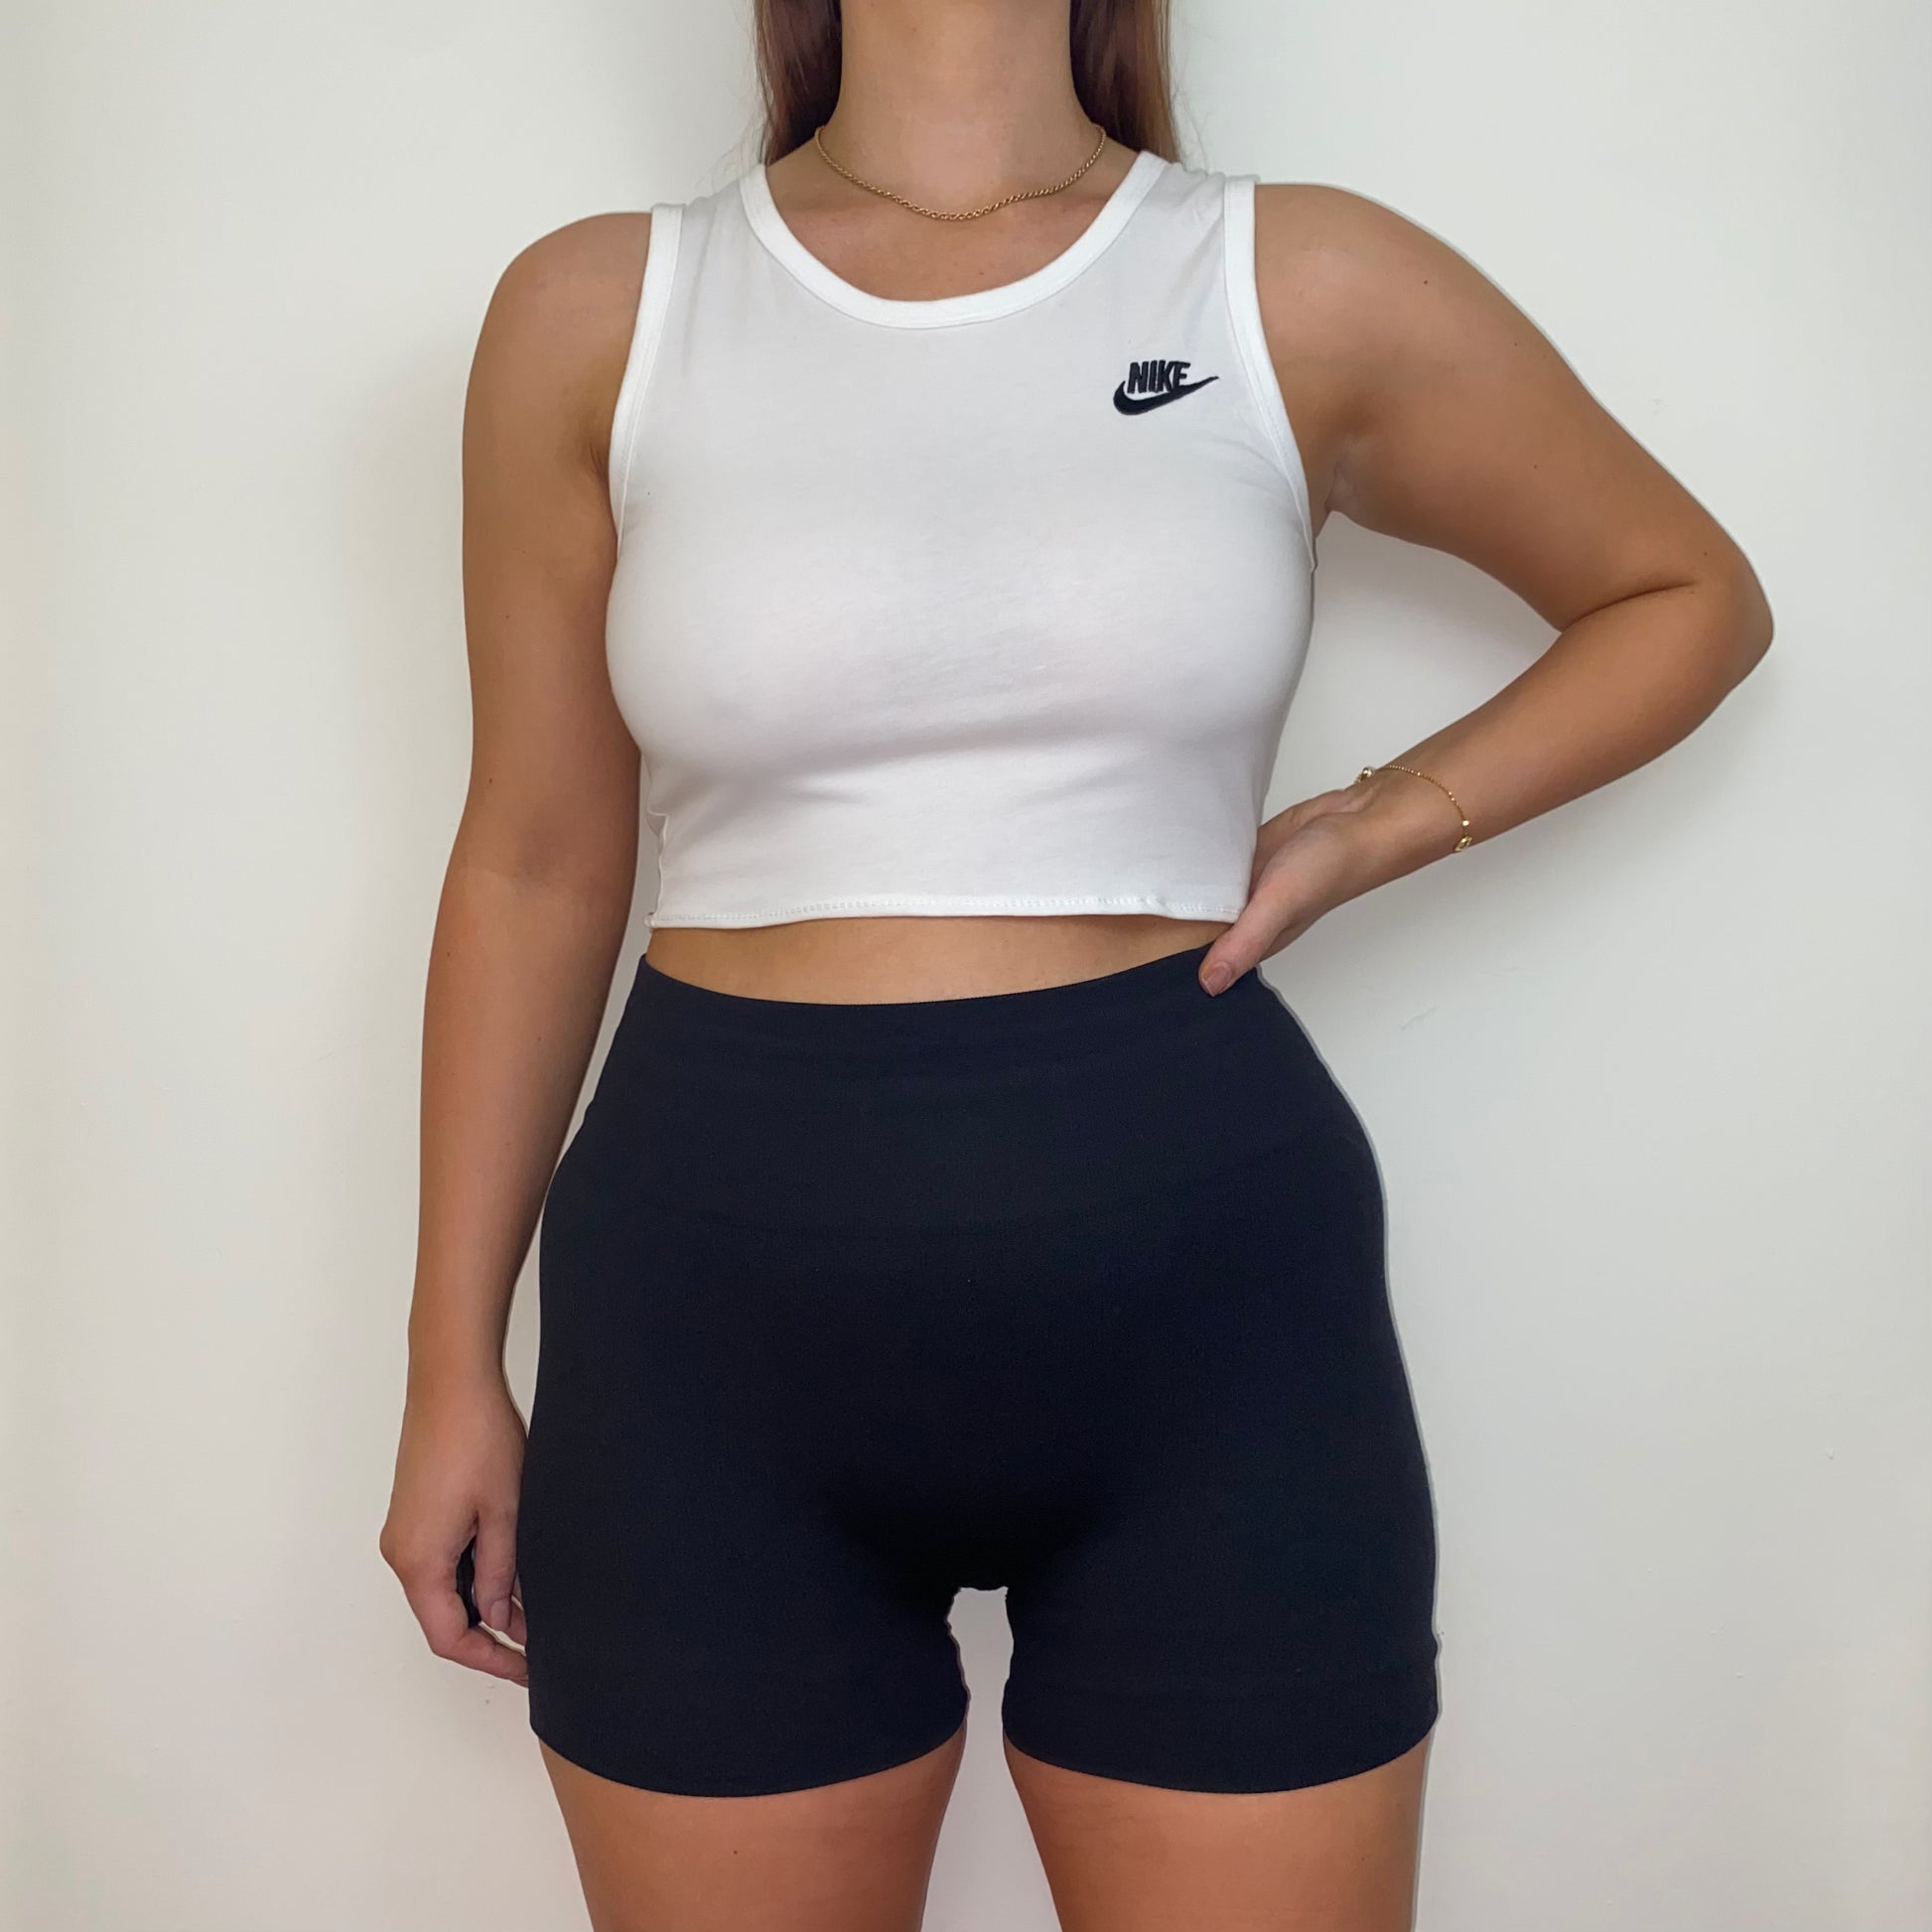 white short sleeve crop top with black nike logo shown on a model wearing black shorts